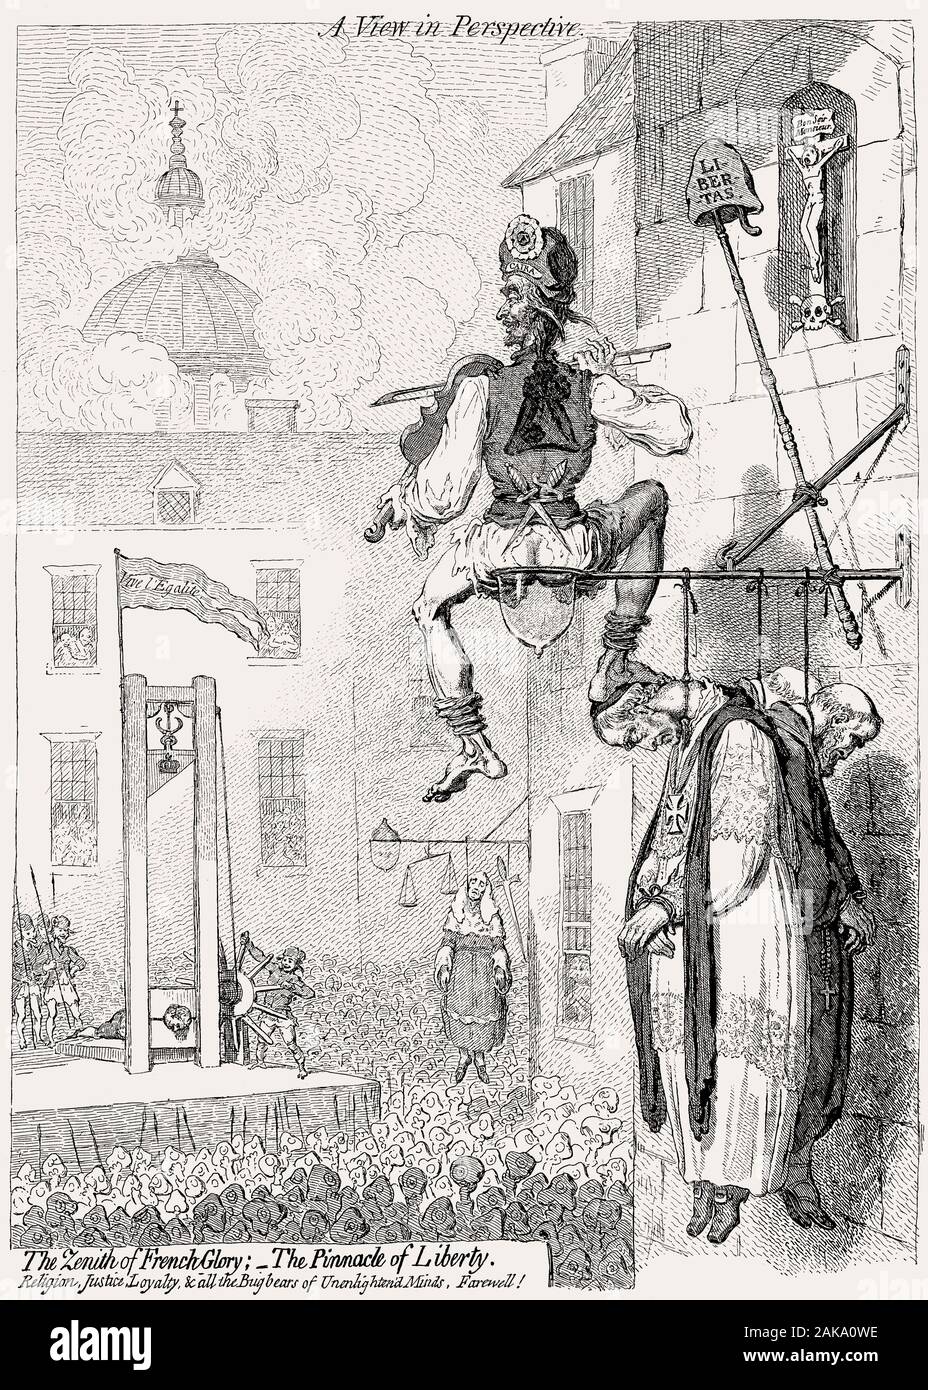 Caricature on the execution of Louis XVI, the Zenith of French Glory, James Gillray, 1793 Stock Photo